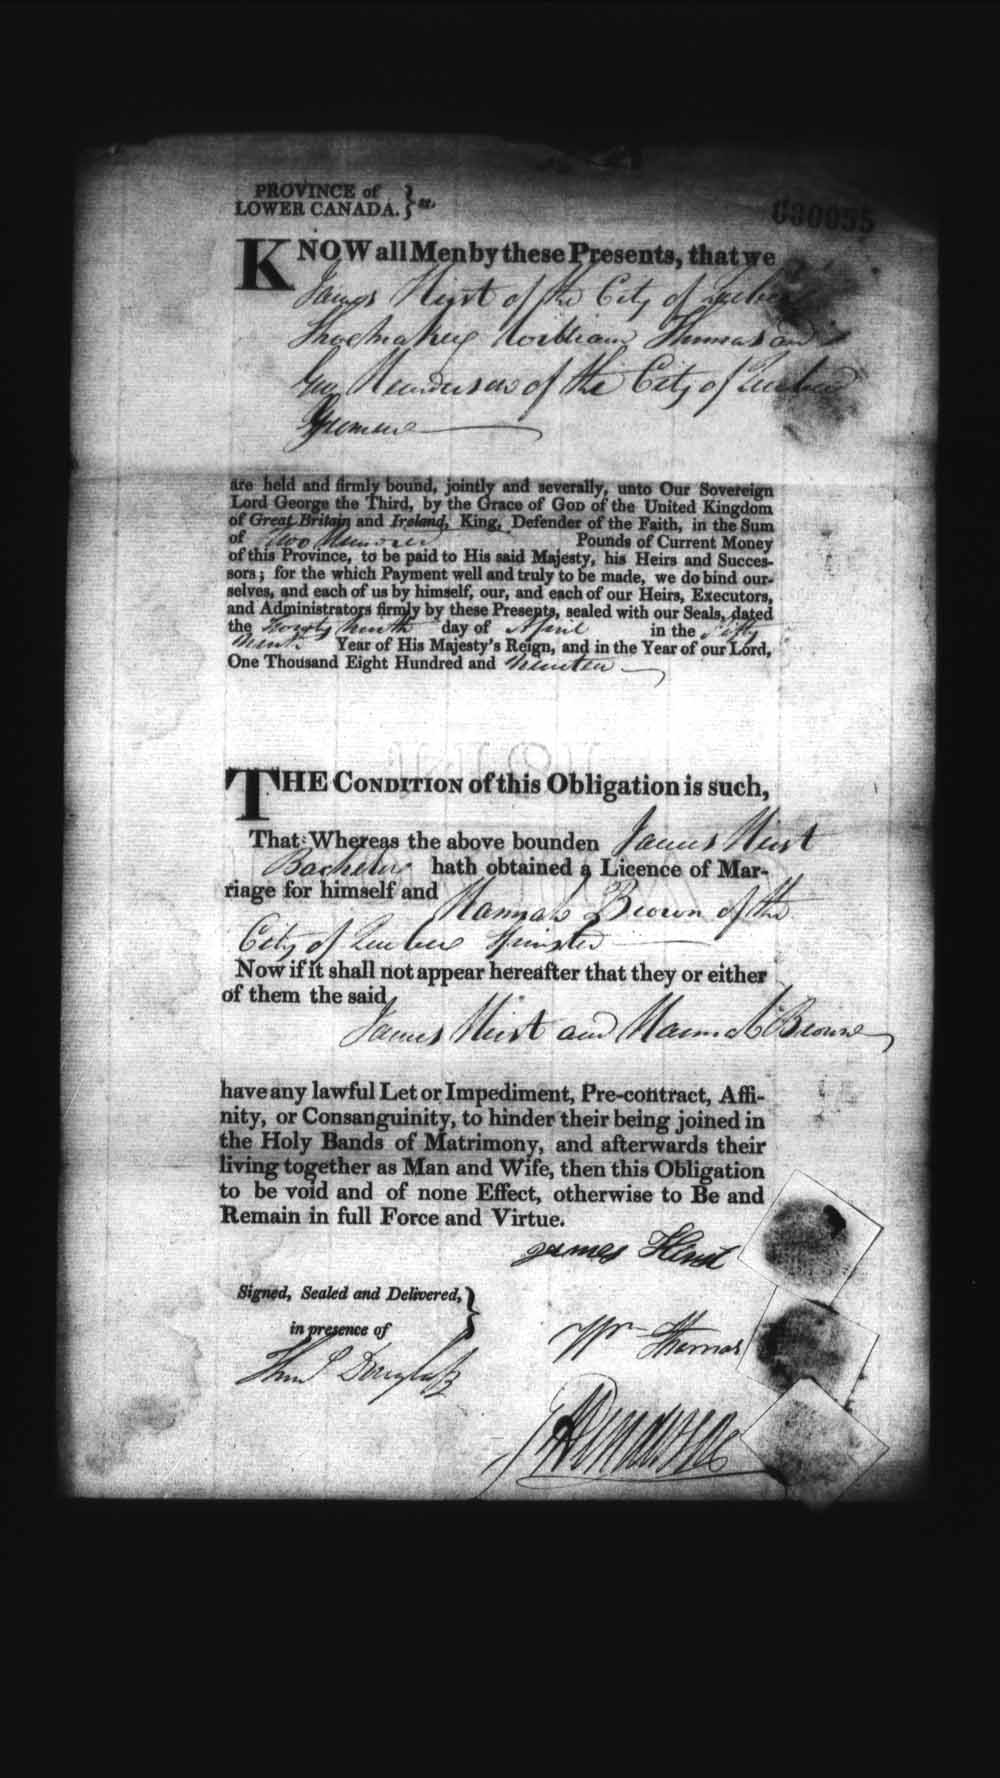 Digitized page of Upper and Lower Canada Marriage Bonds (1779-1865) for Image No.: e008235877